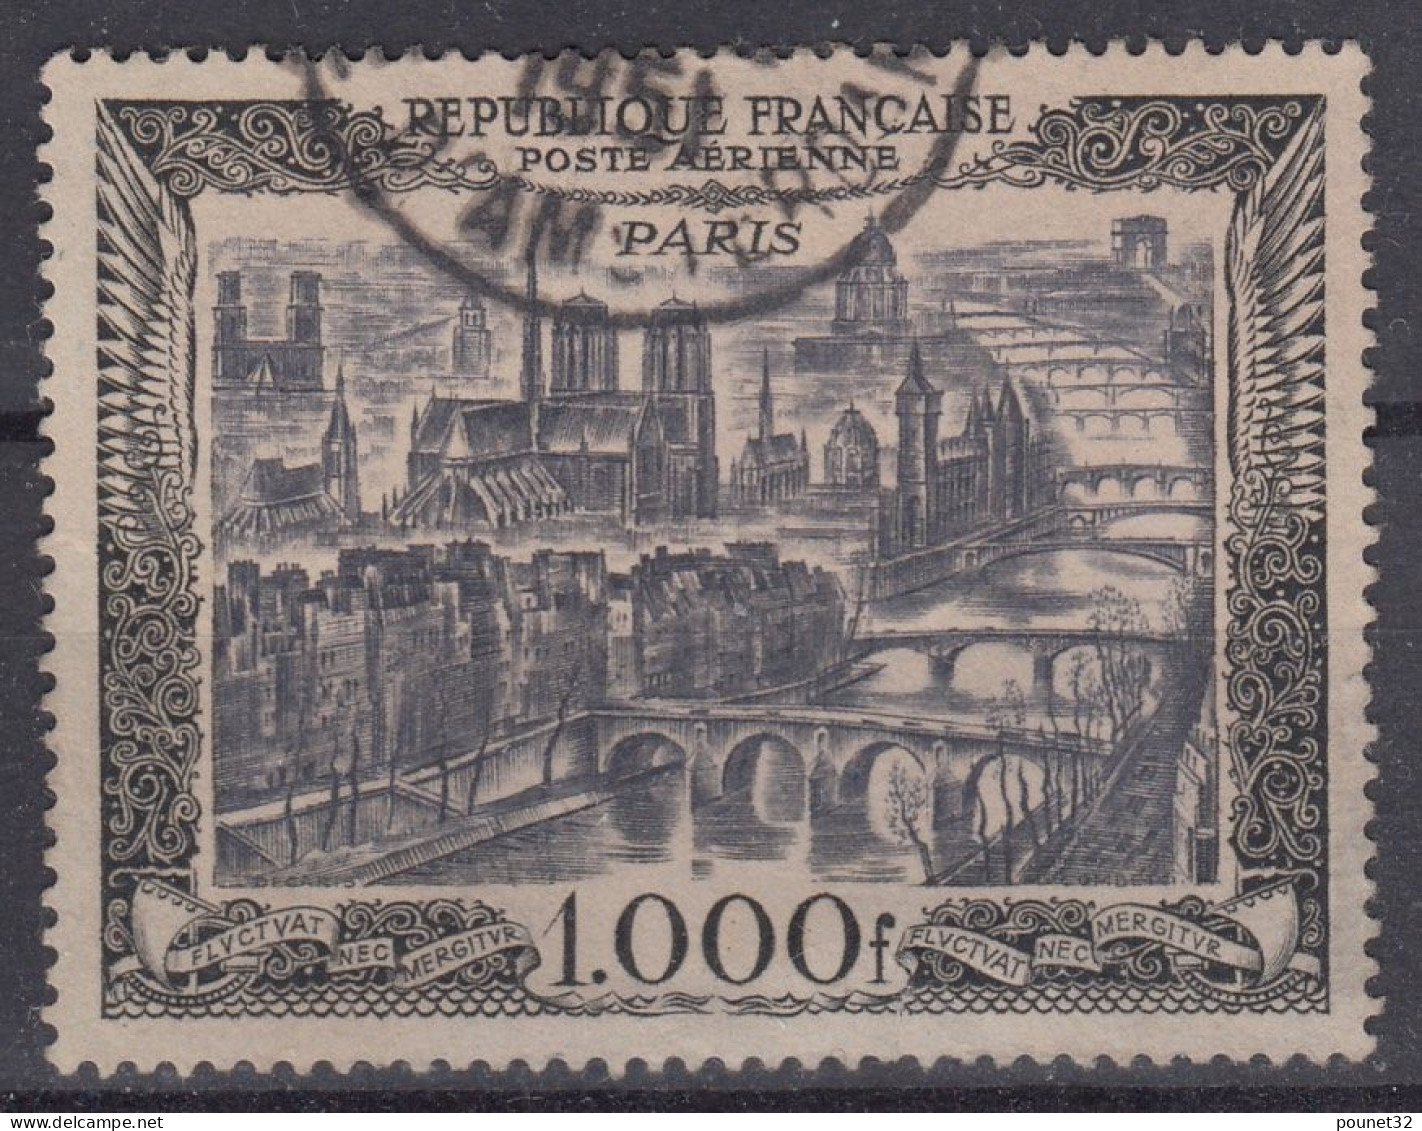 TIMBRE FRANCE 1950 - POSTE AERIENNE N° 29 PARIS 1000 F OBLITERATION CHOISIE - 1927-1959 Used